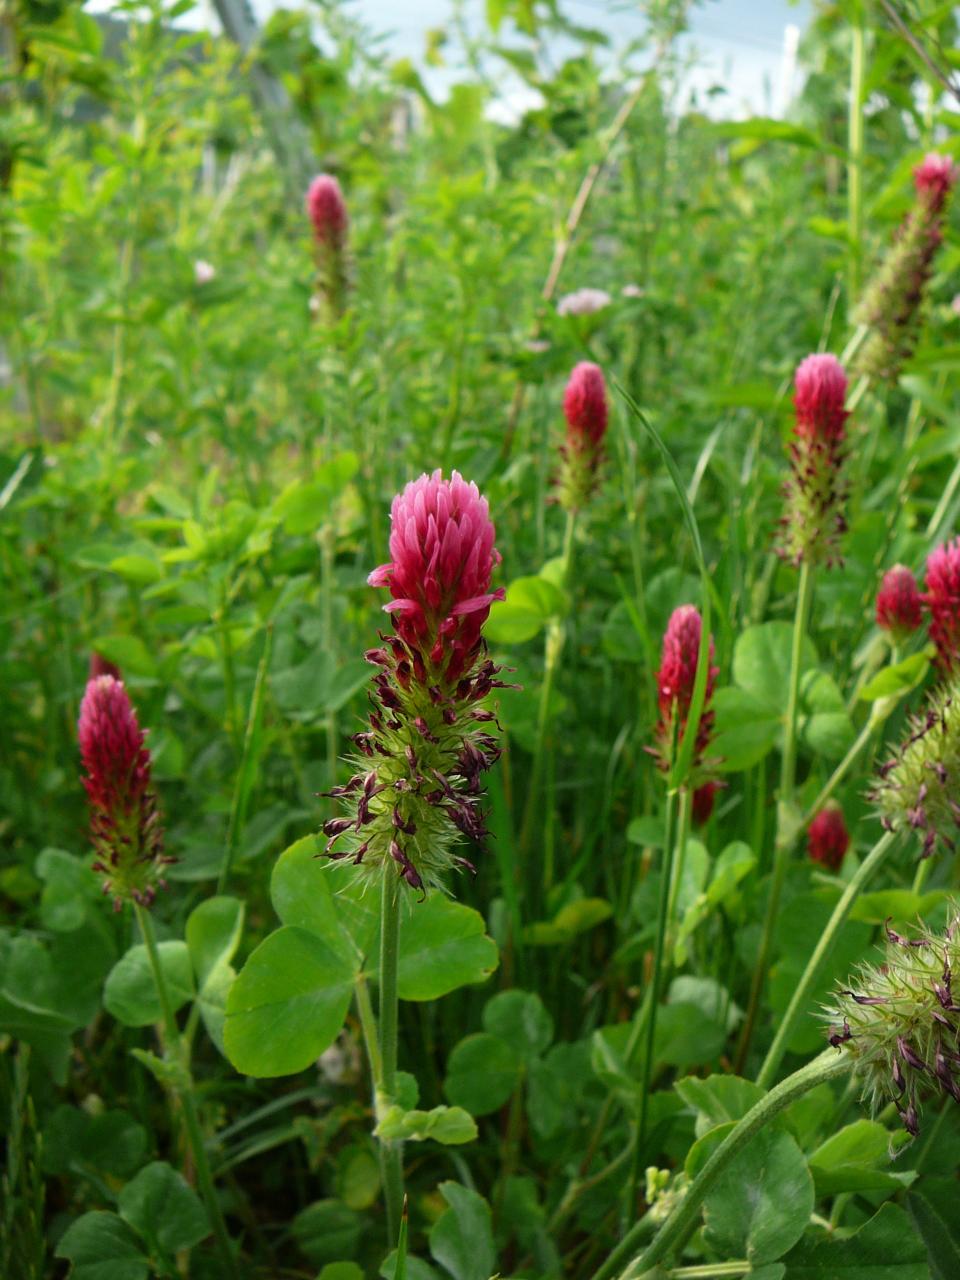 Crimson clover is a cover crop as well as nectar source.